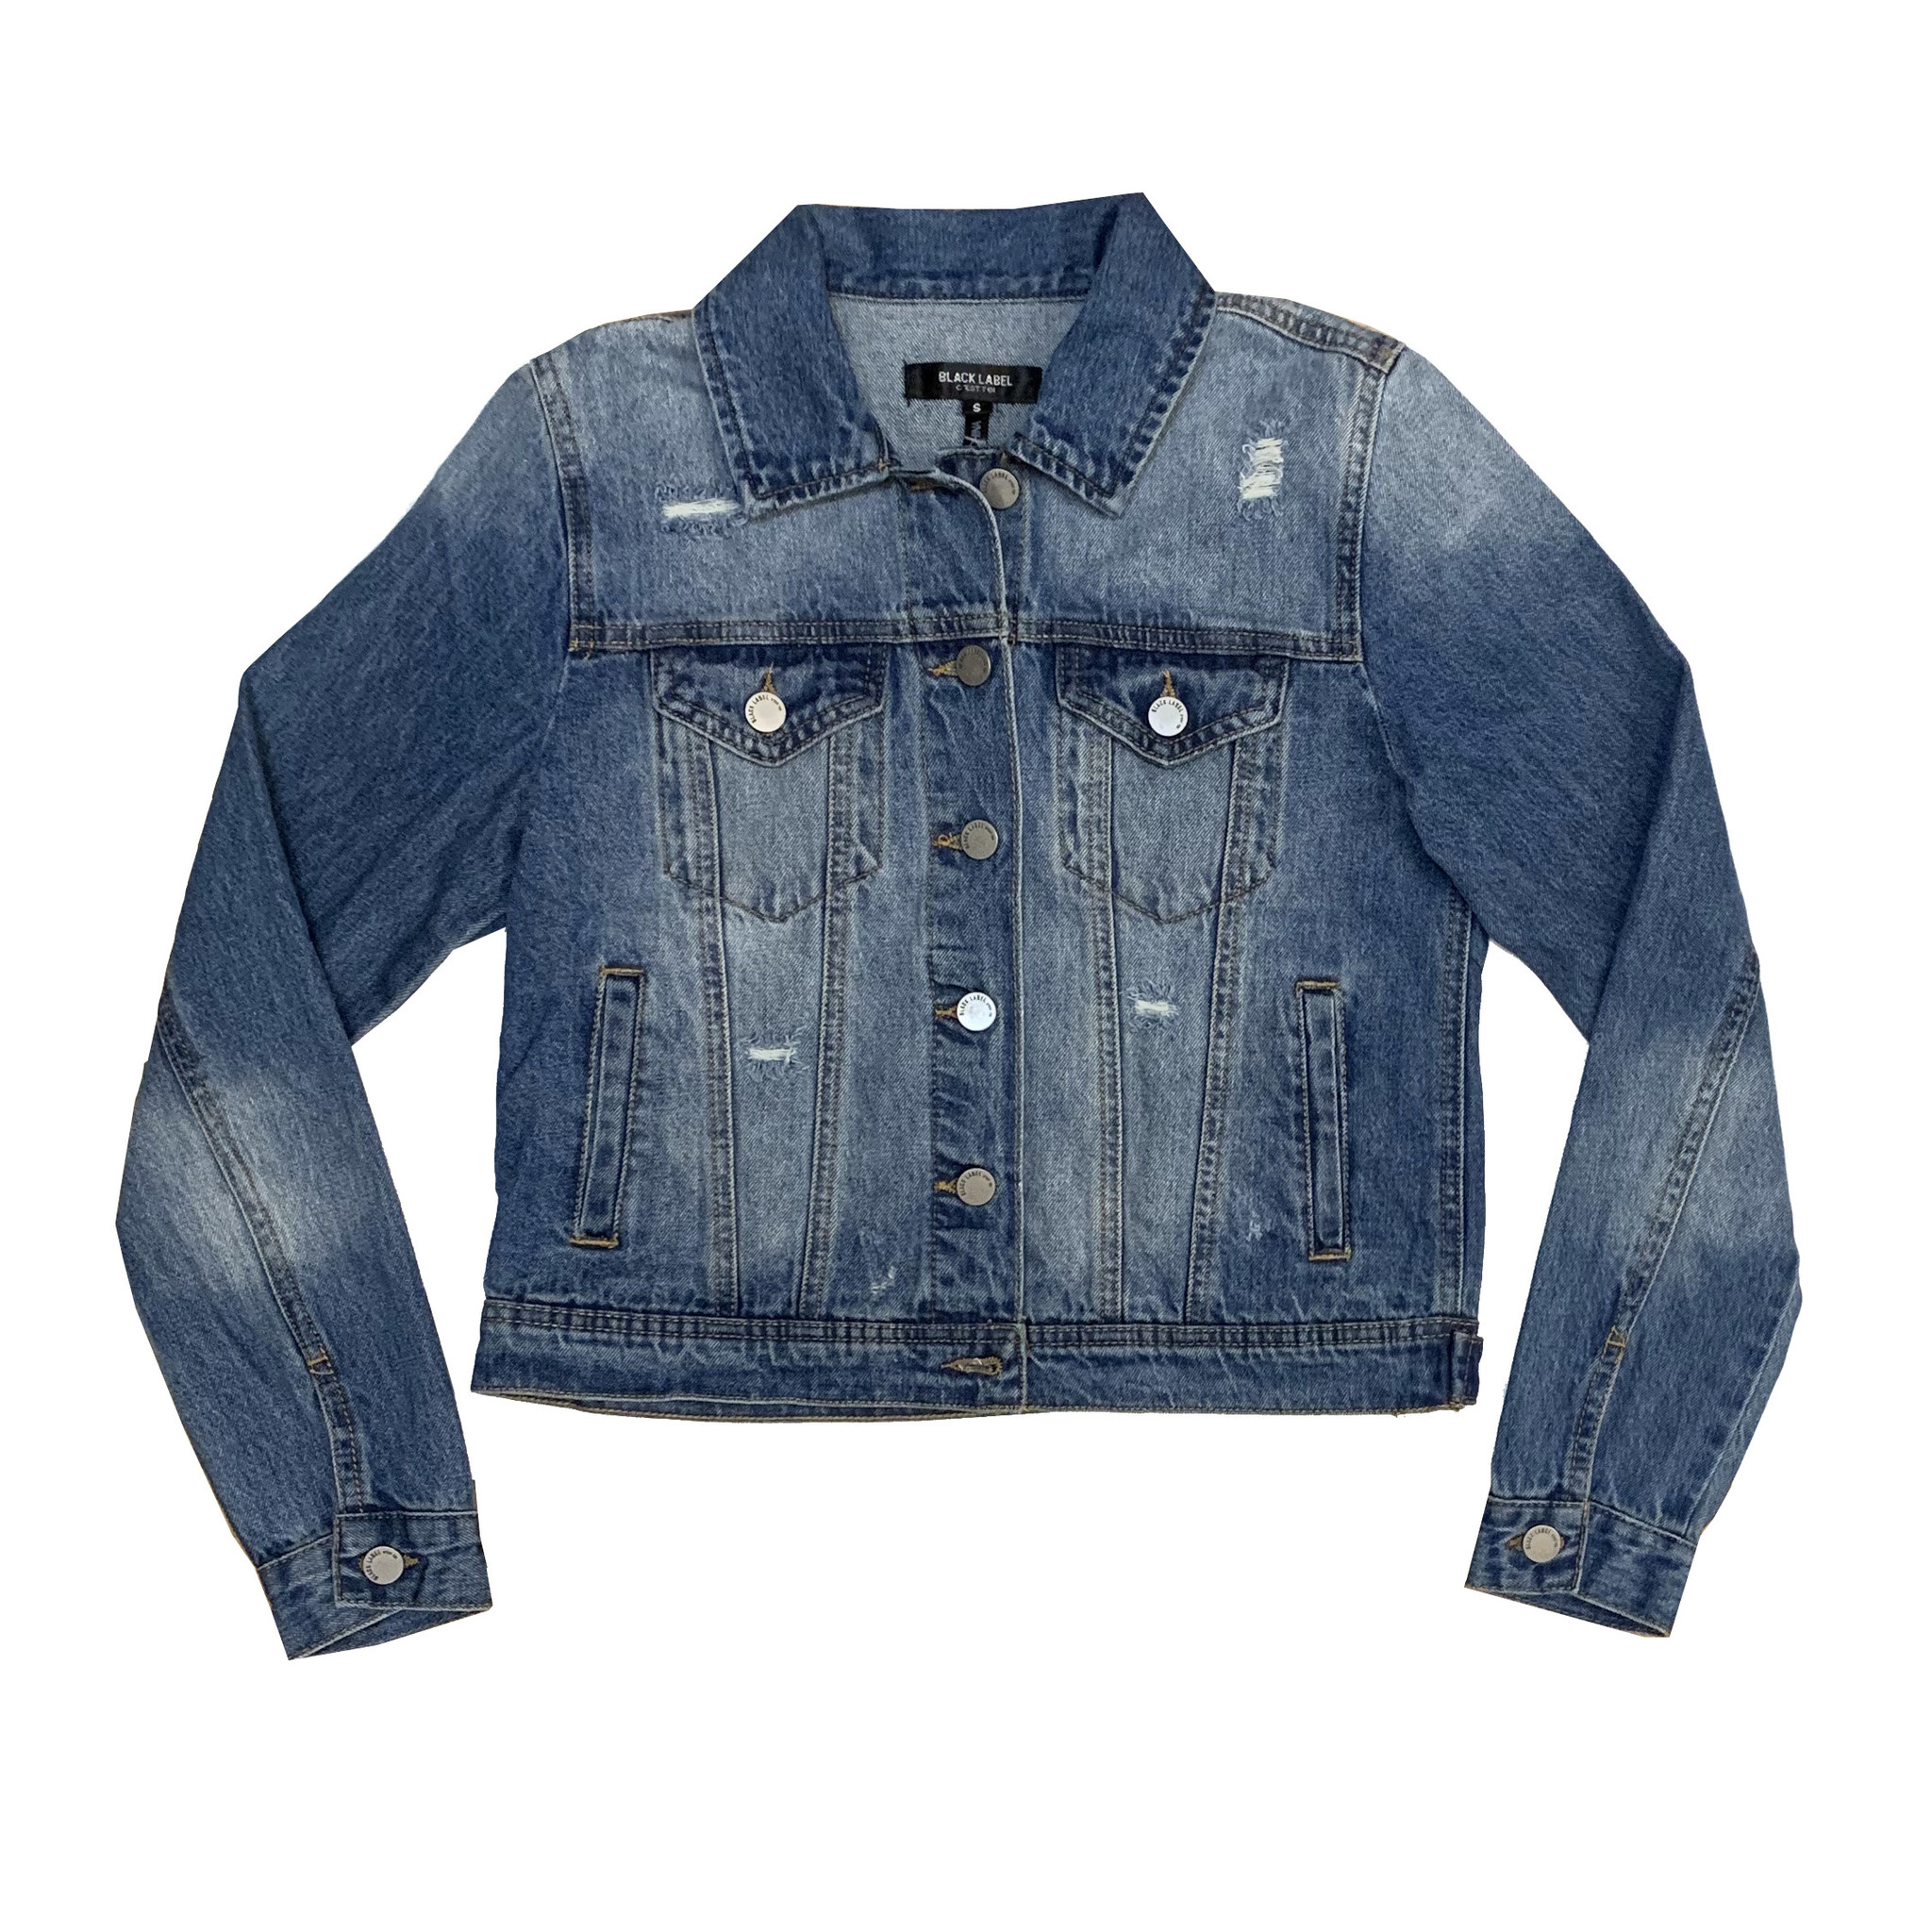 Elegod Women's Casual Button Down Ripped Distressed Denim Jacket Jean  Outercoat, Regular Plus Size : Amazon.in: Clothing & Accessories